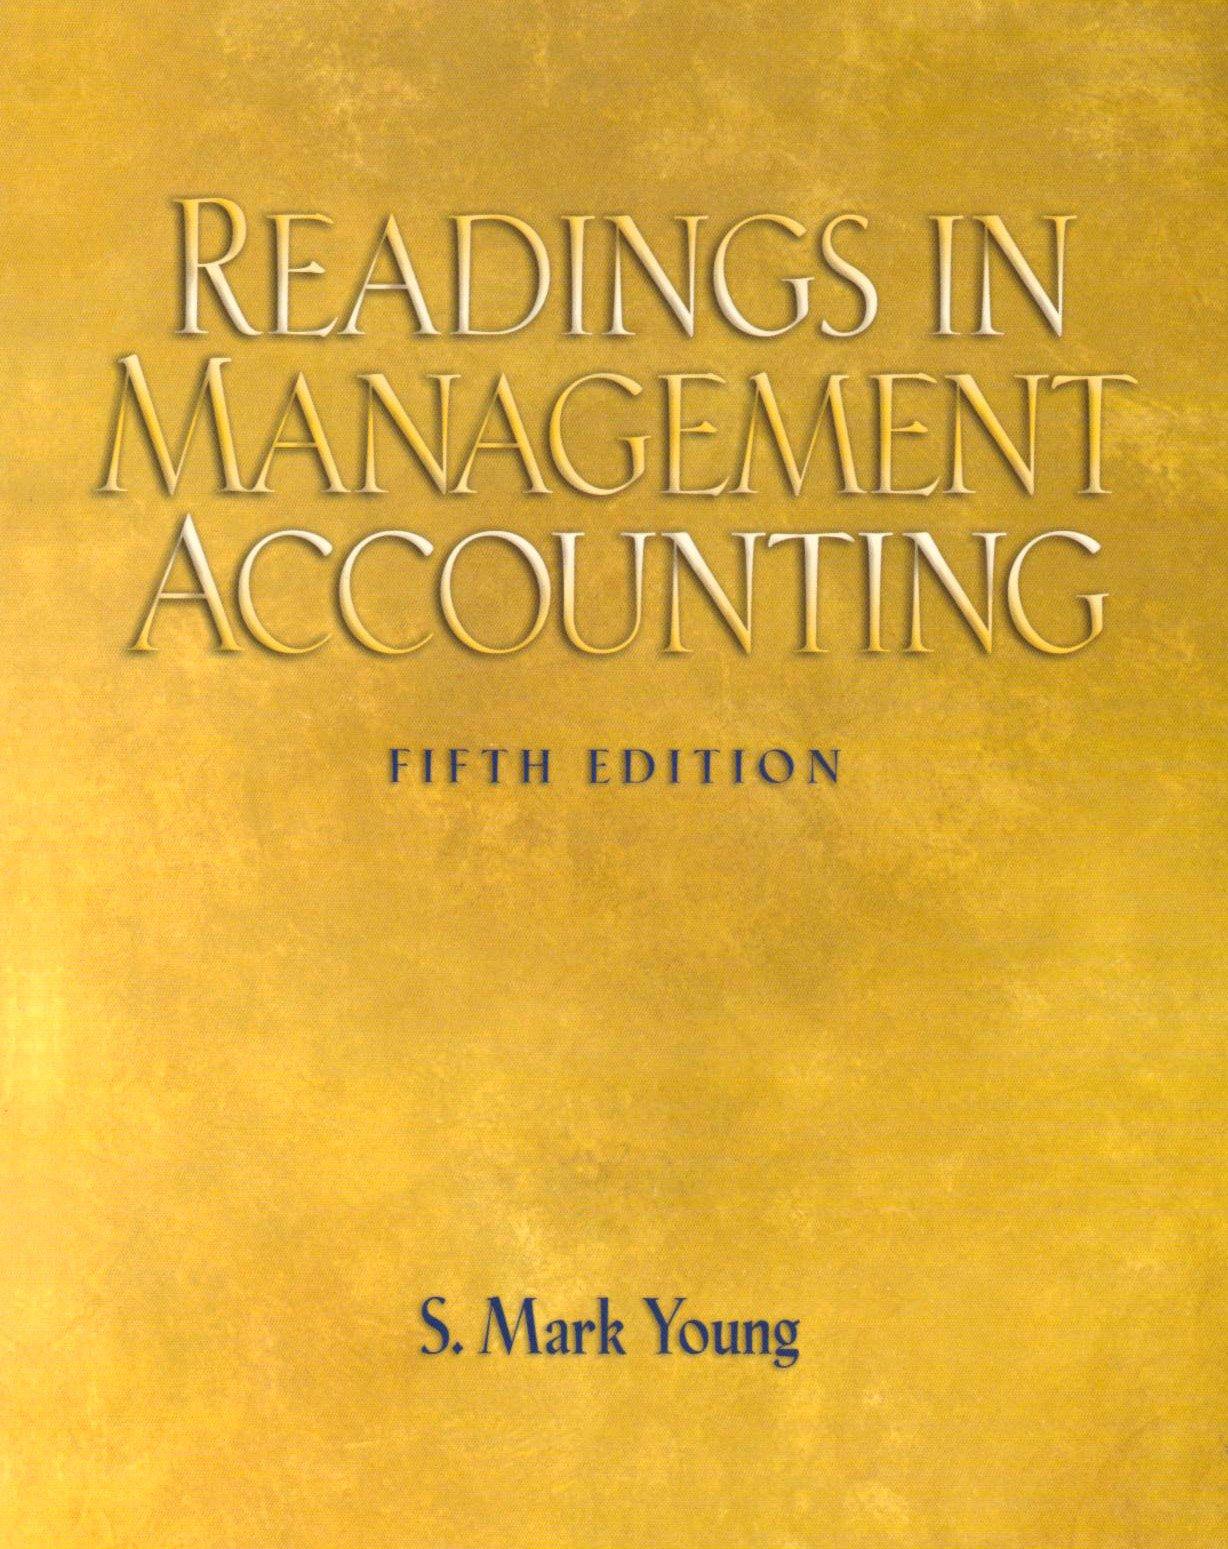 readings in management and accounting 5th edition s. mark young 0132280221, 978-0132280228